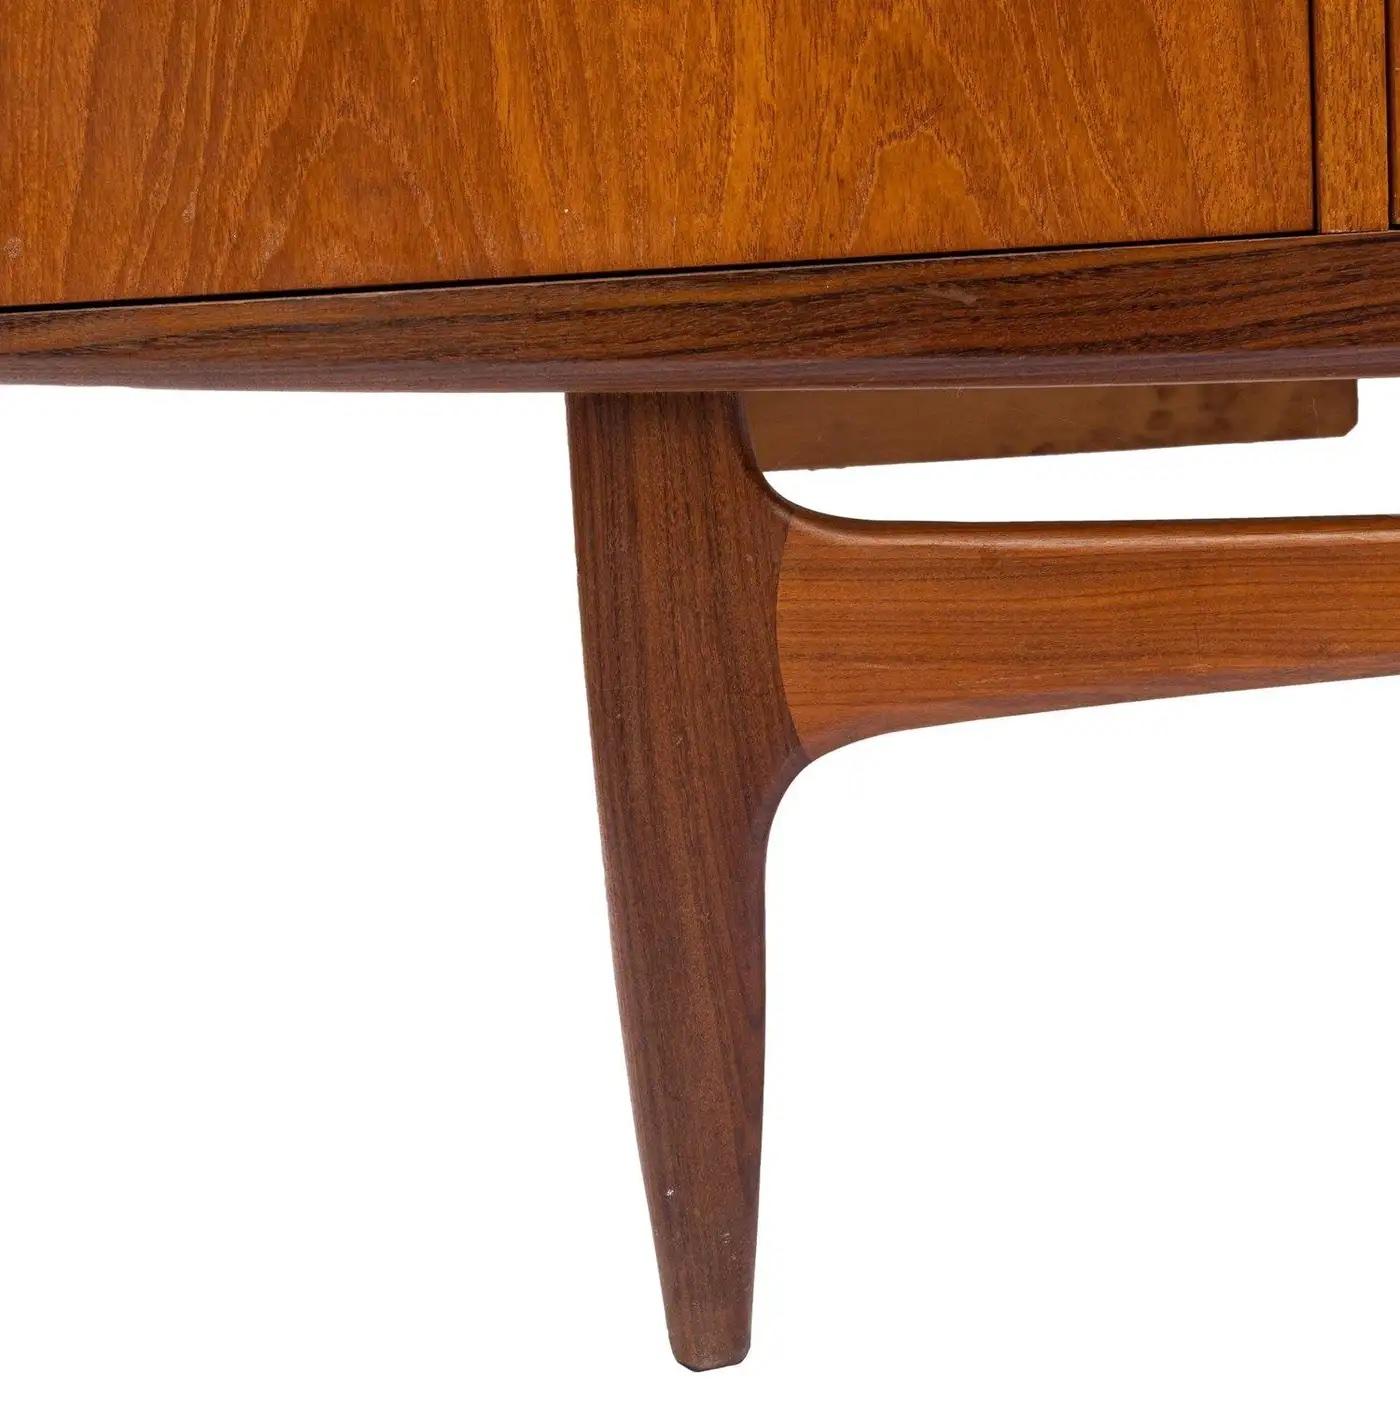 Mid-Century Teak Fresco Sideboard by v. Wilkins for G Plan, English, Ca. 1960 For Sale 10